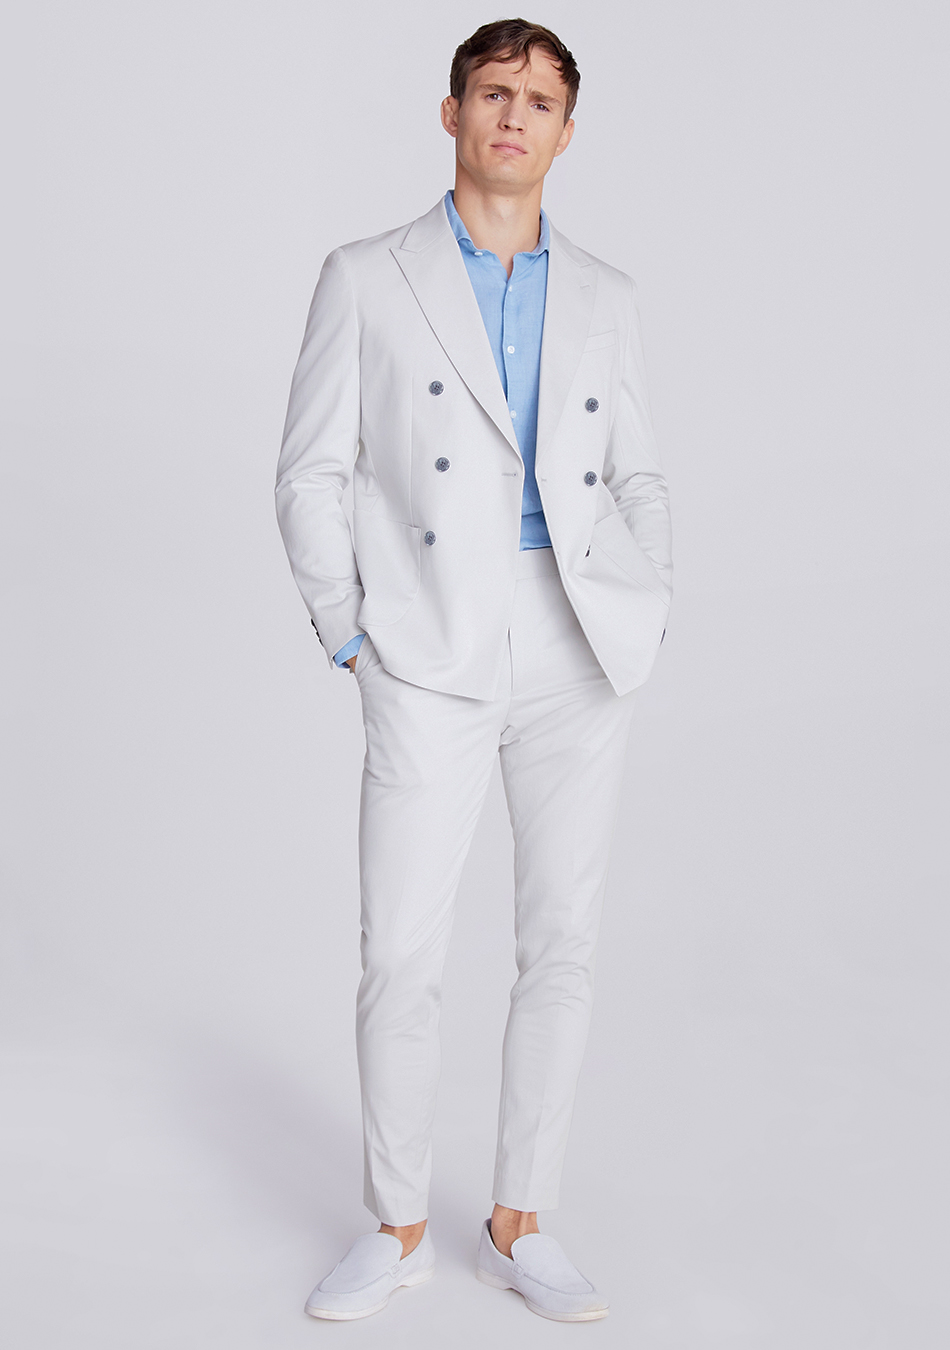 Light grey cotton suit, blue dress shirt, and white loafers